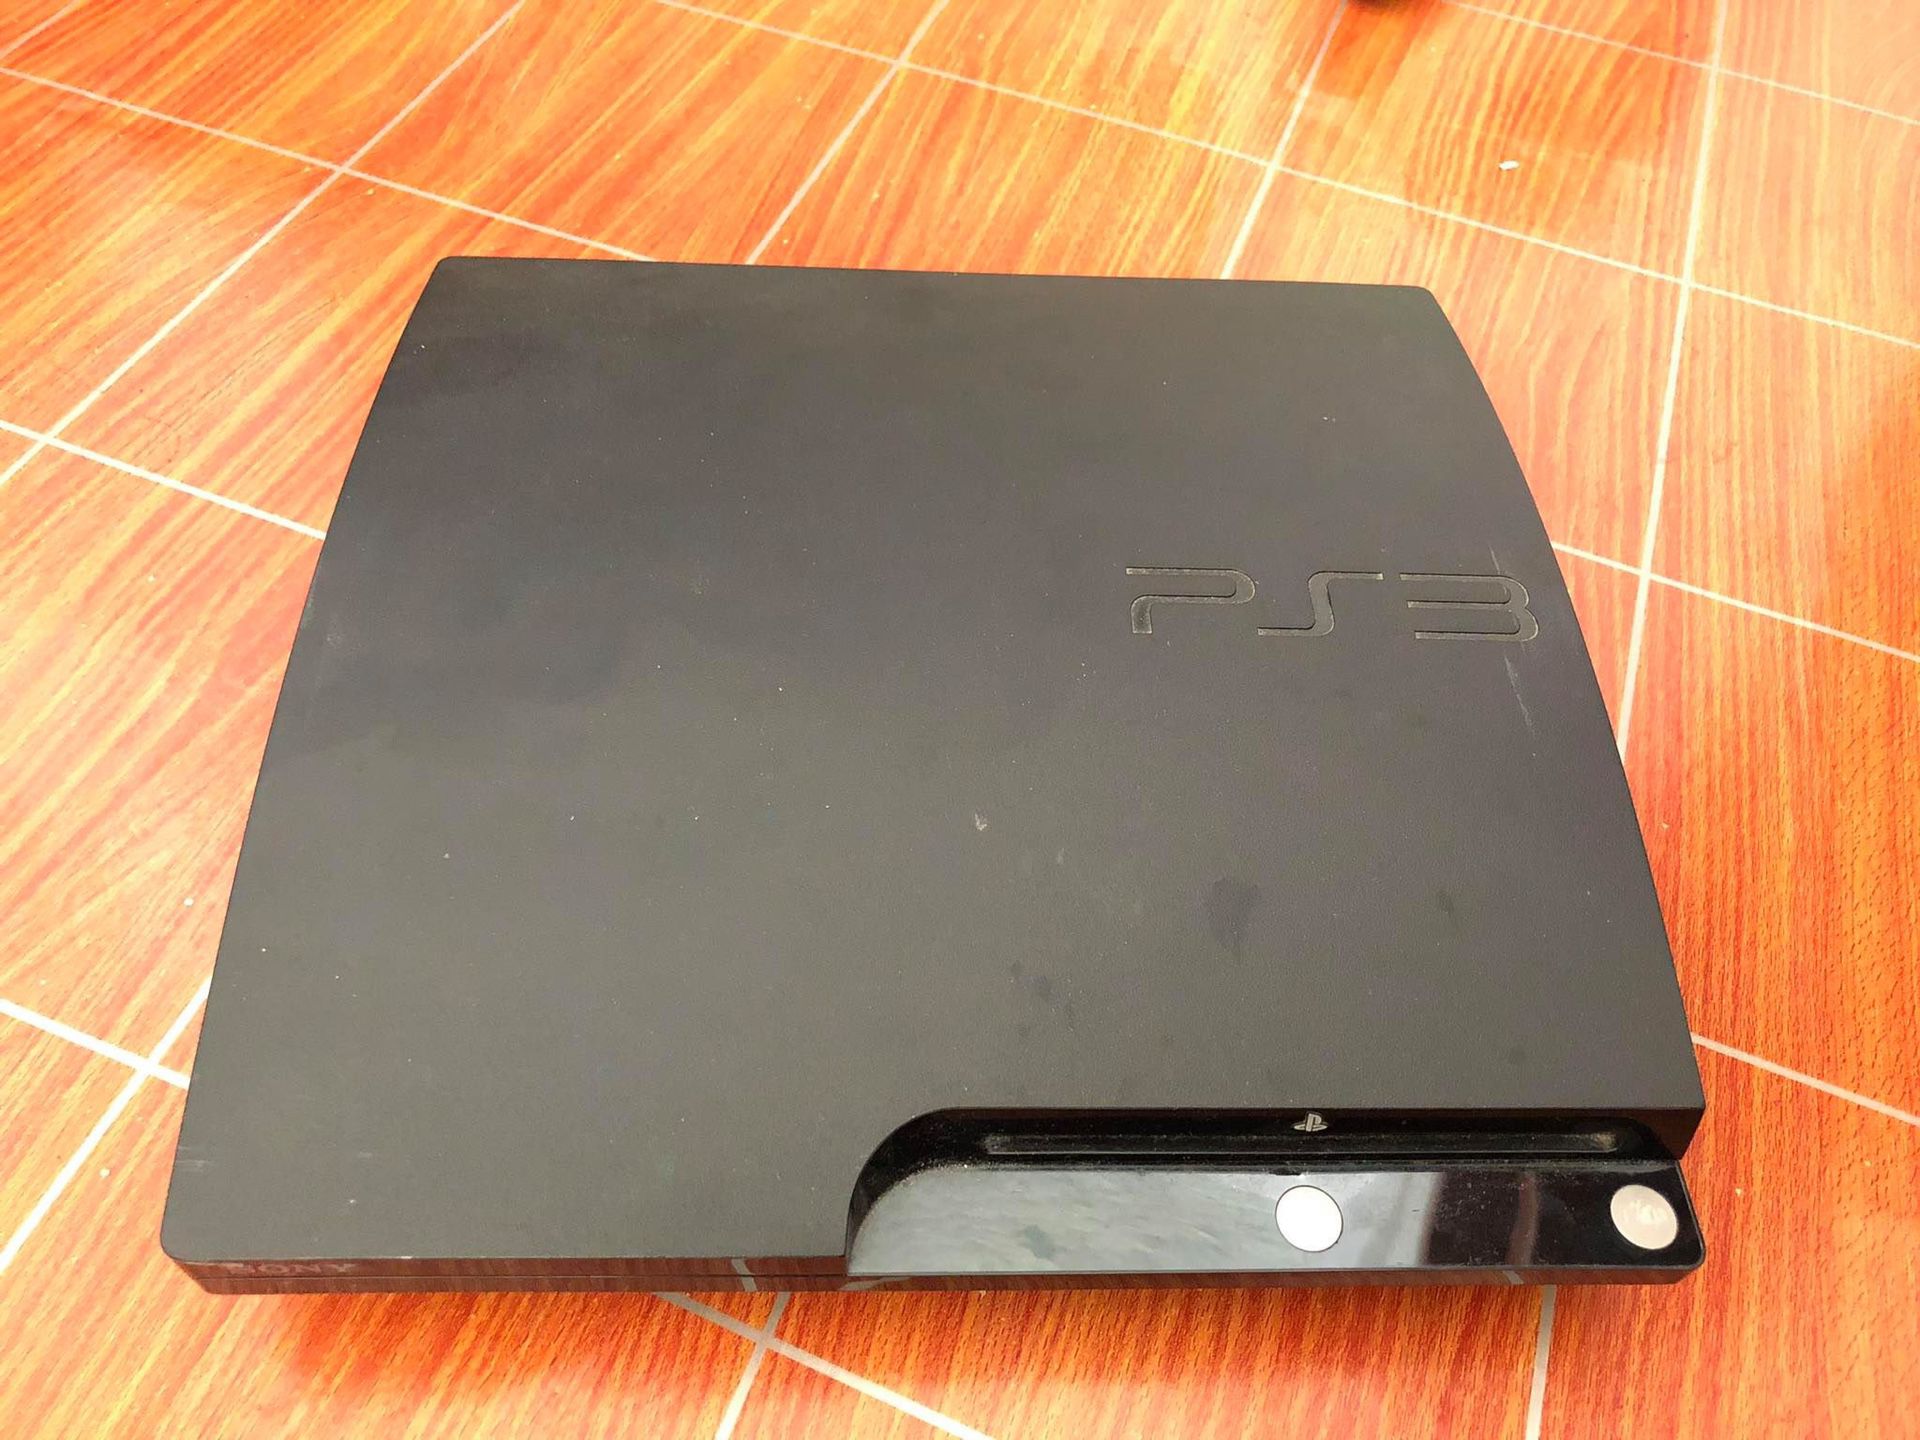 PS3 Slim Jailbroken With Pay Mod MeNu For GTA 5 And black ops2 With Controller and cables